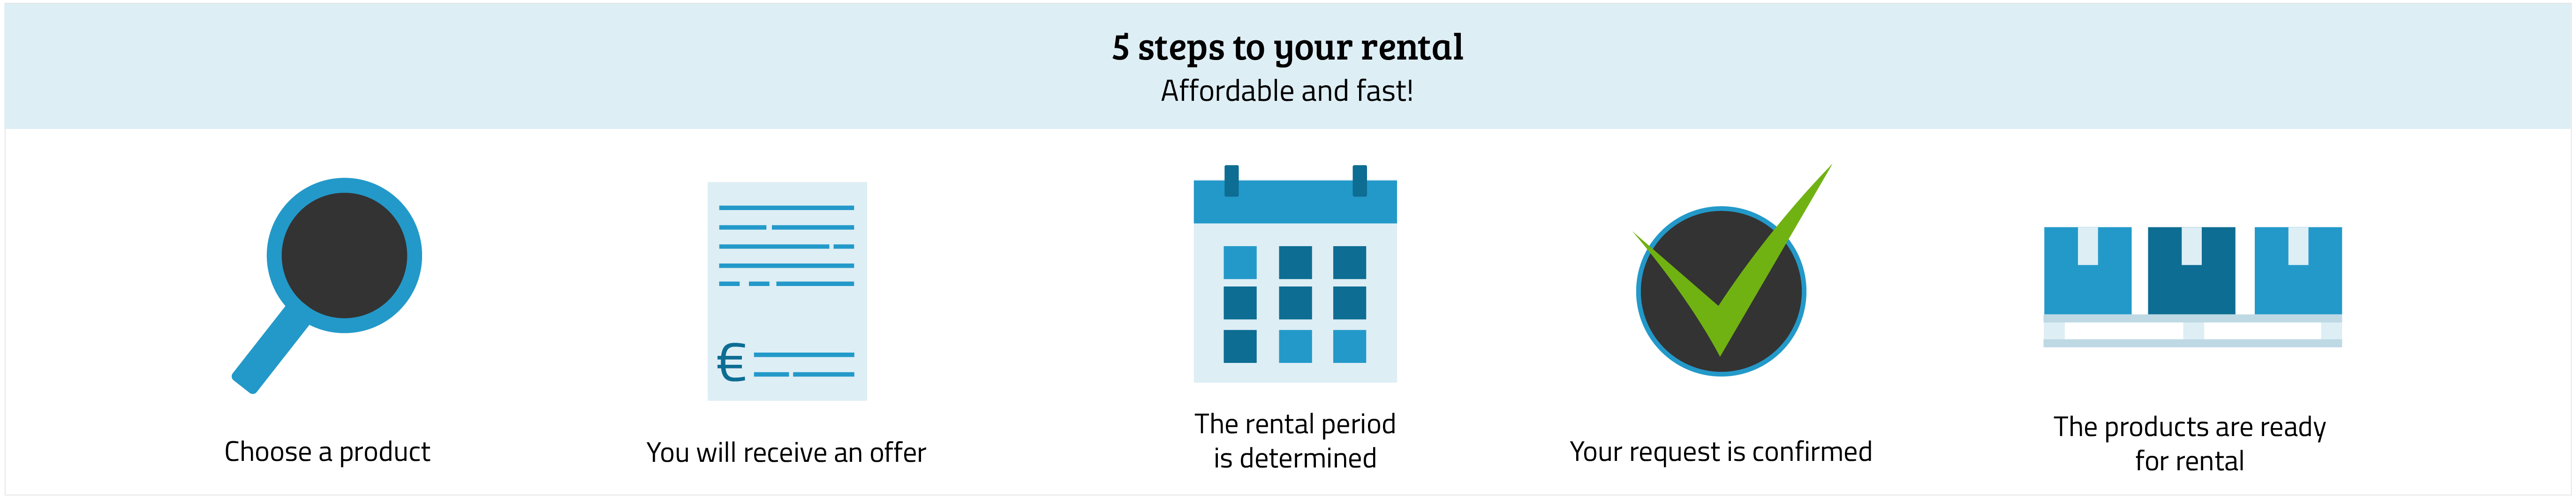 5 steps to your rental